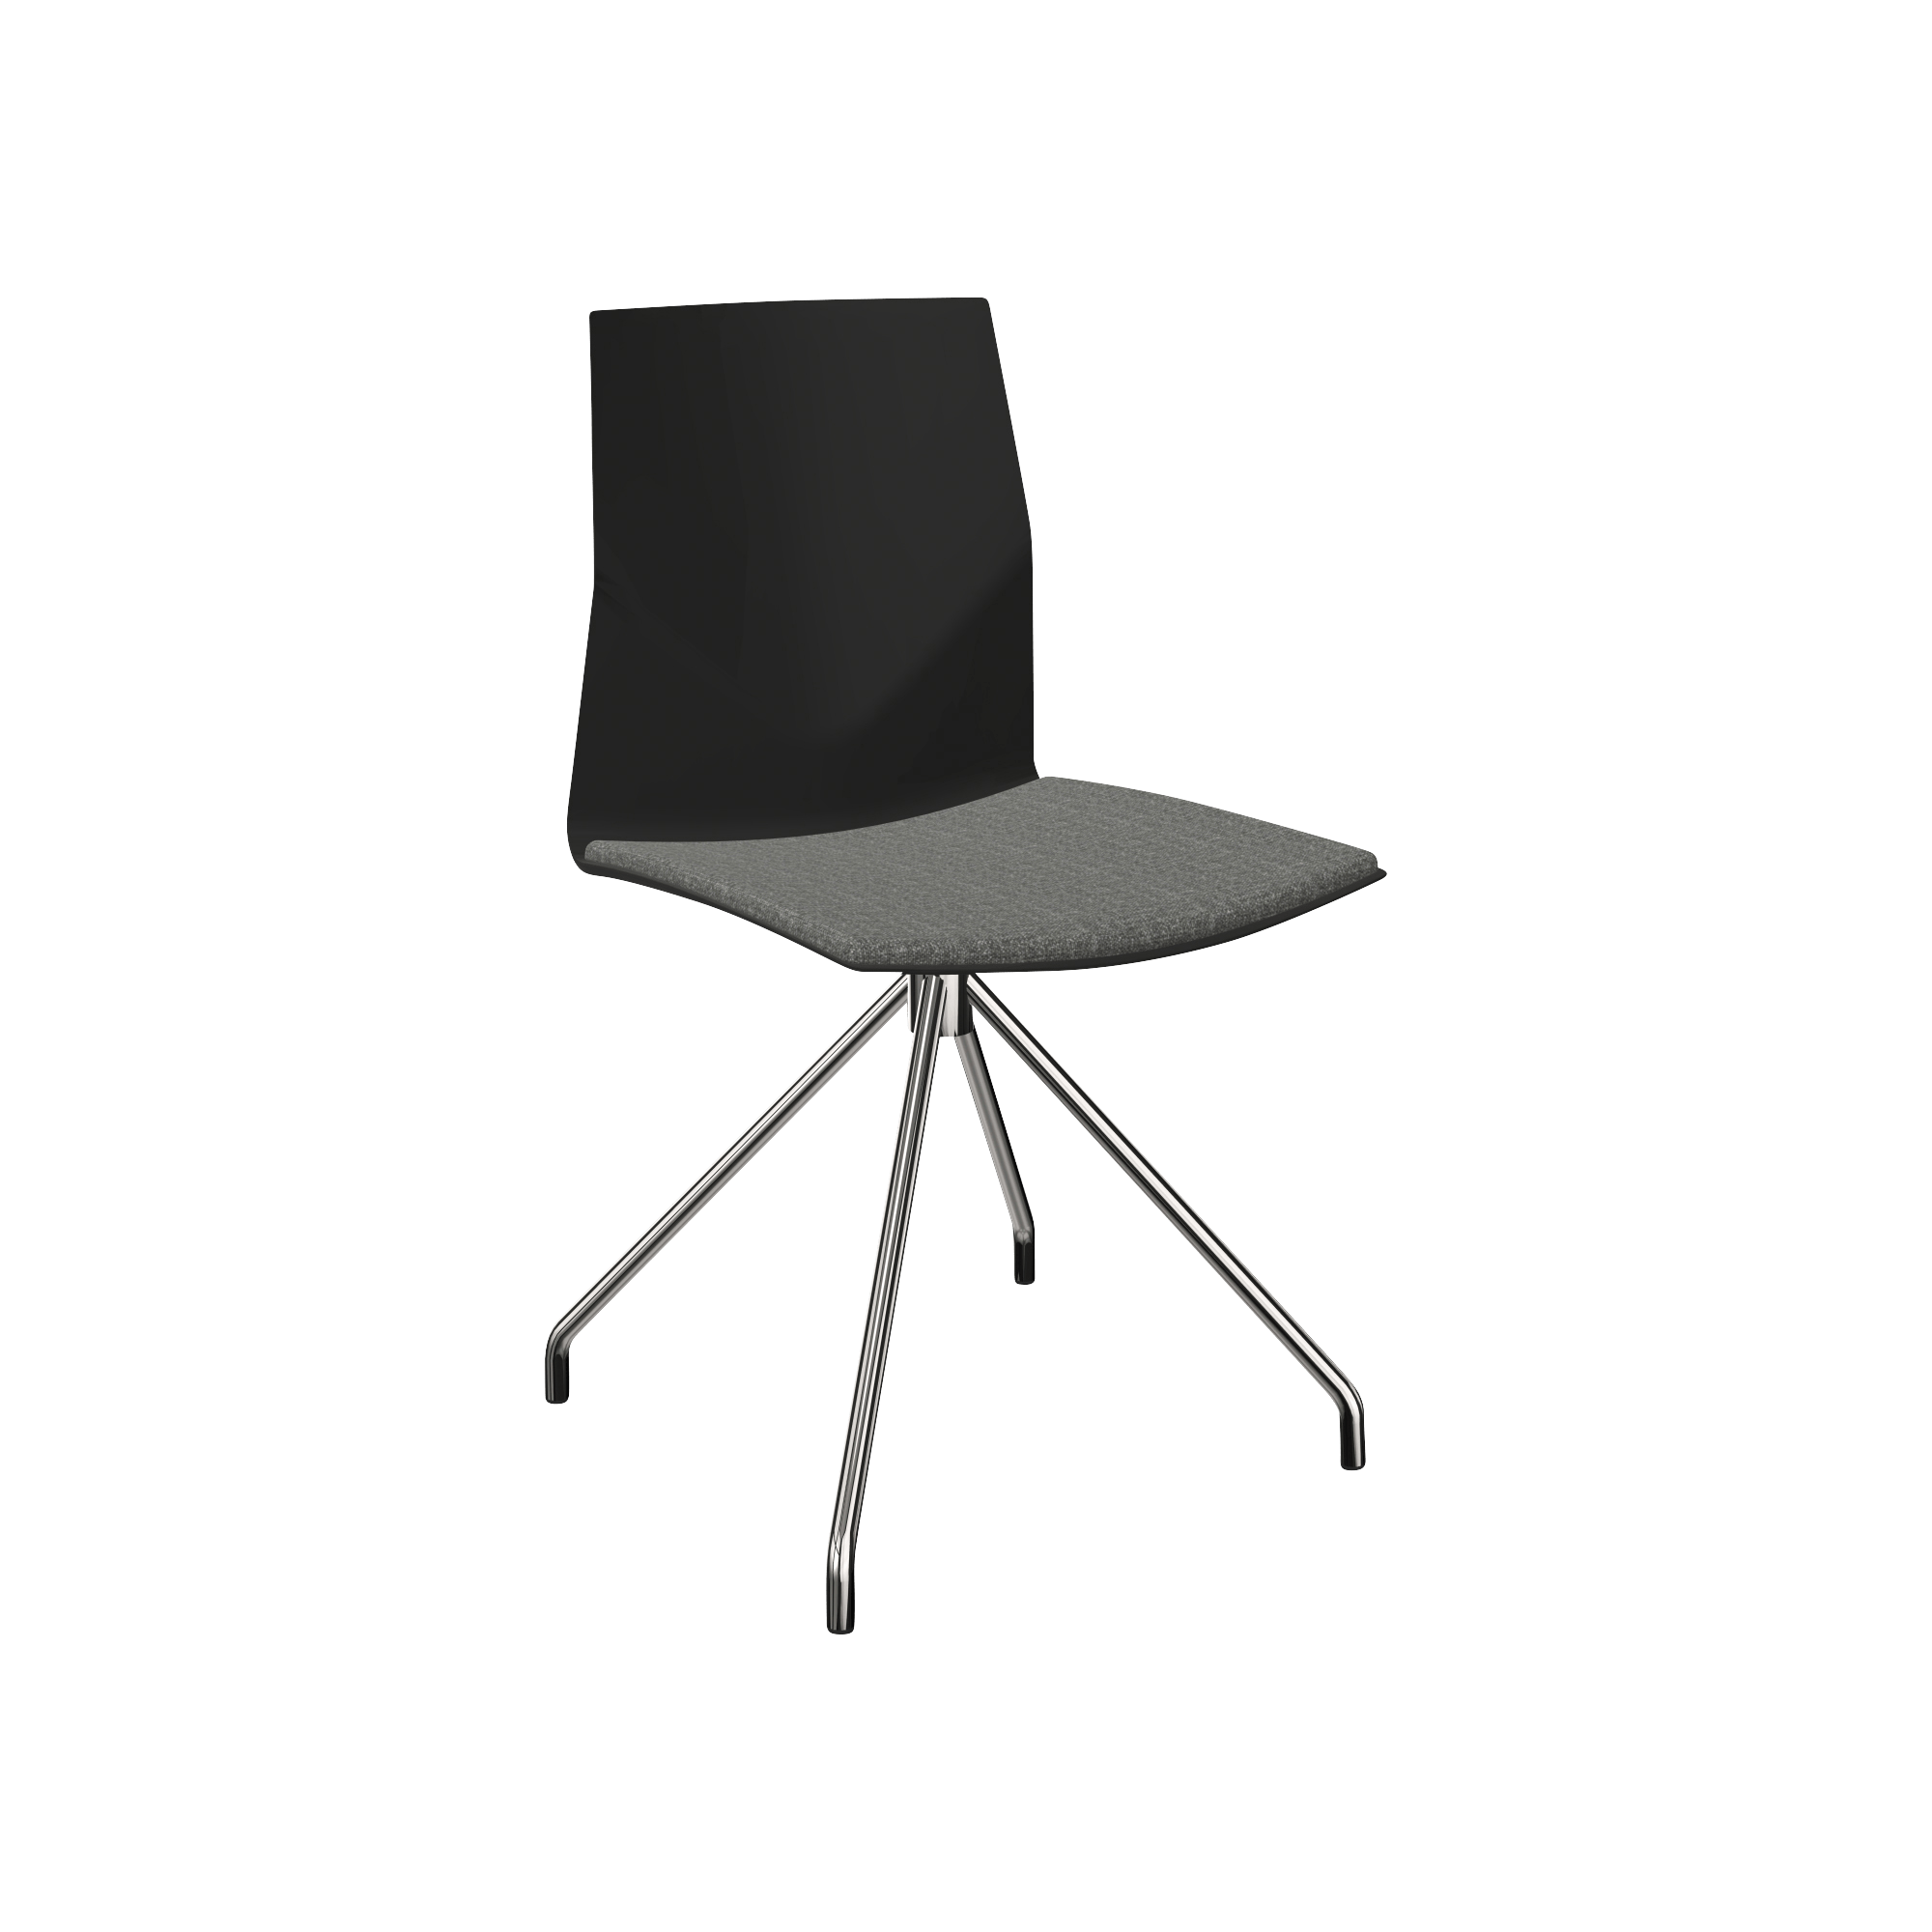 Black chair with grey seat with chrome leg